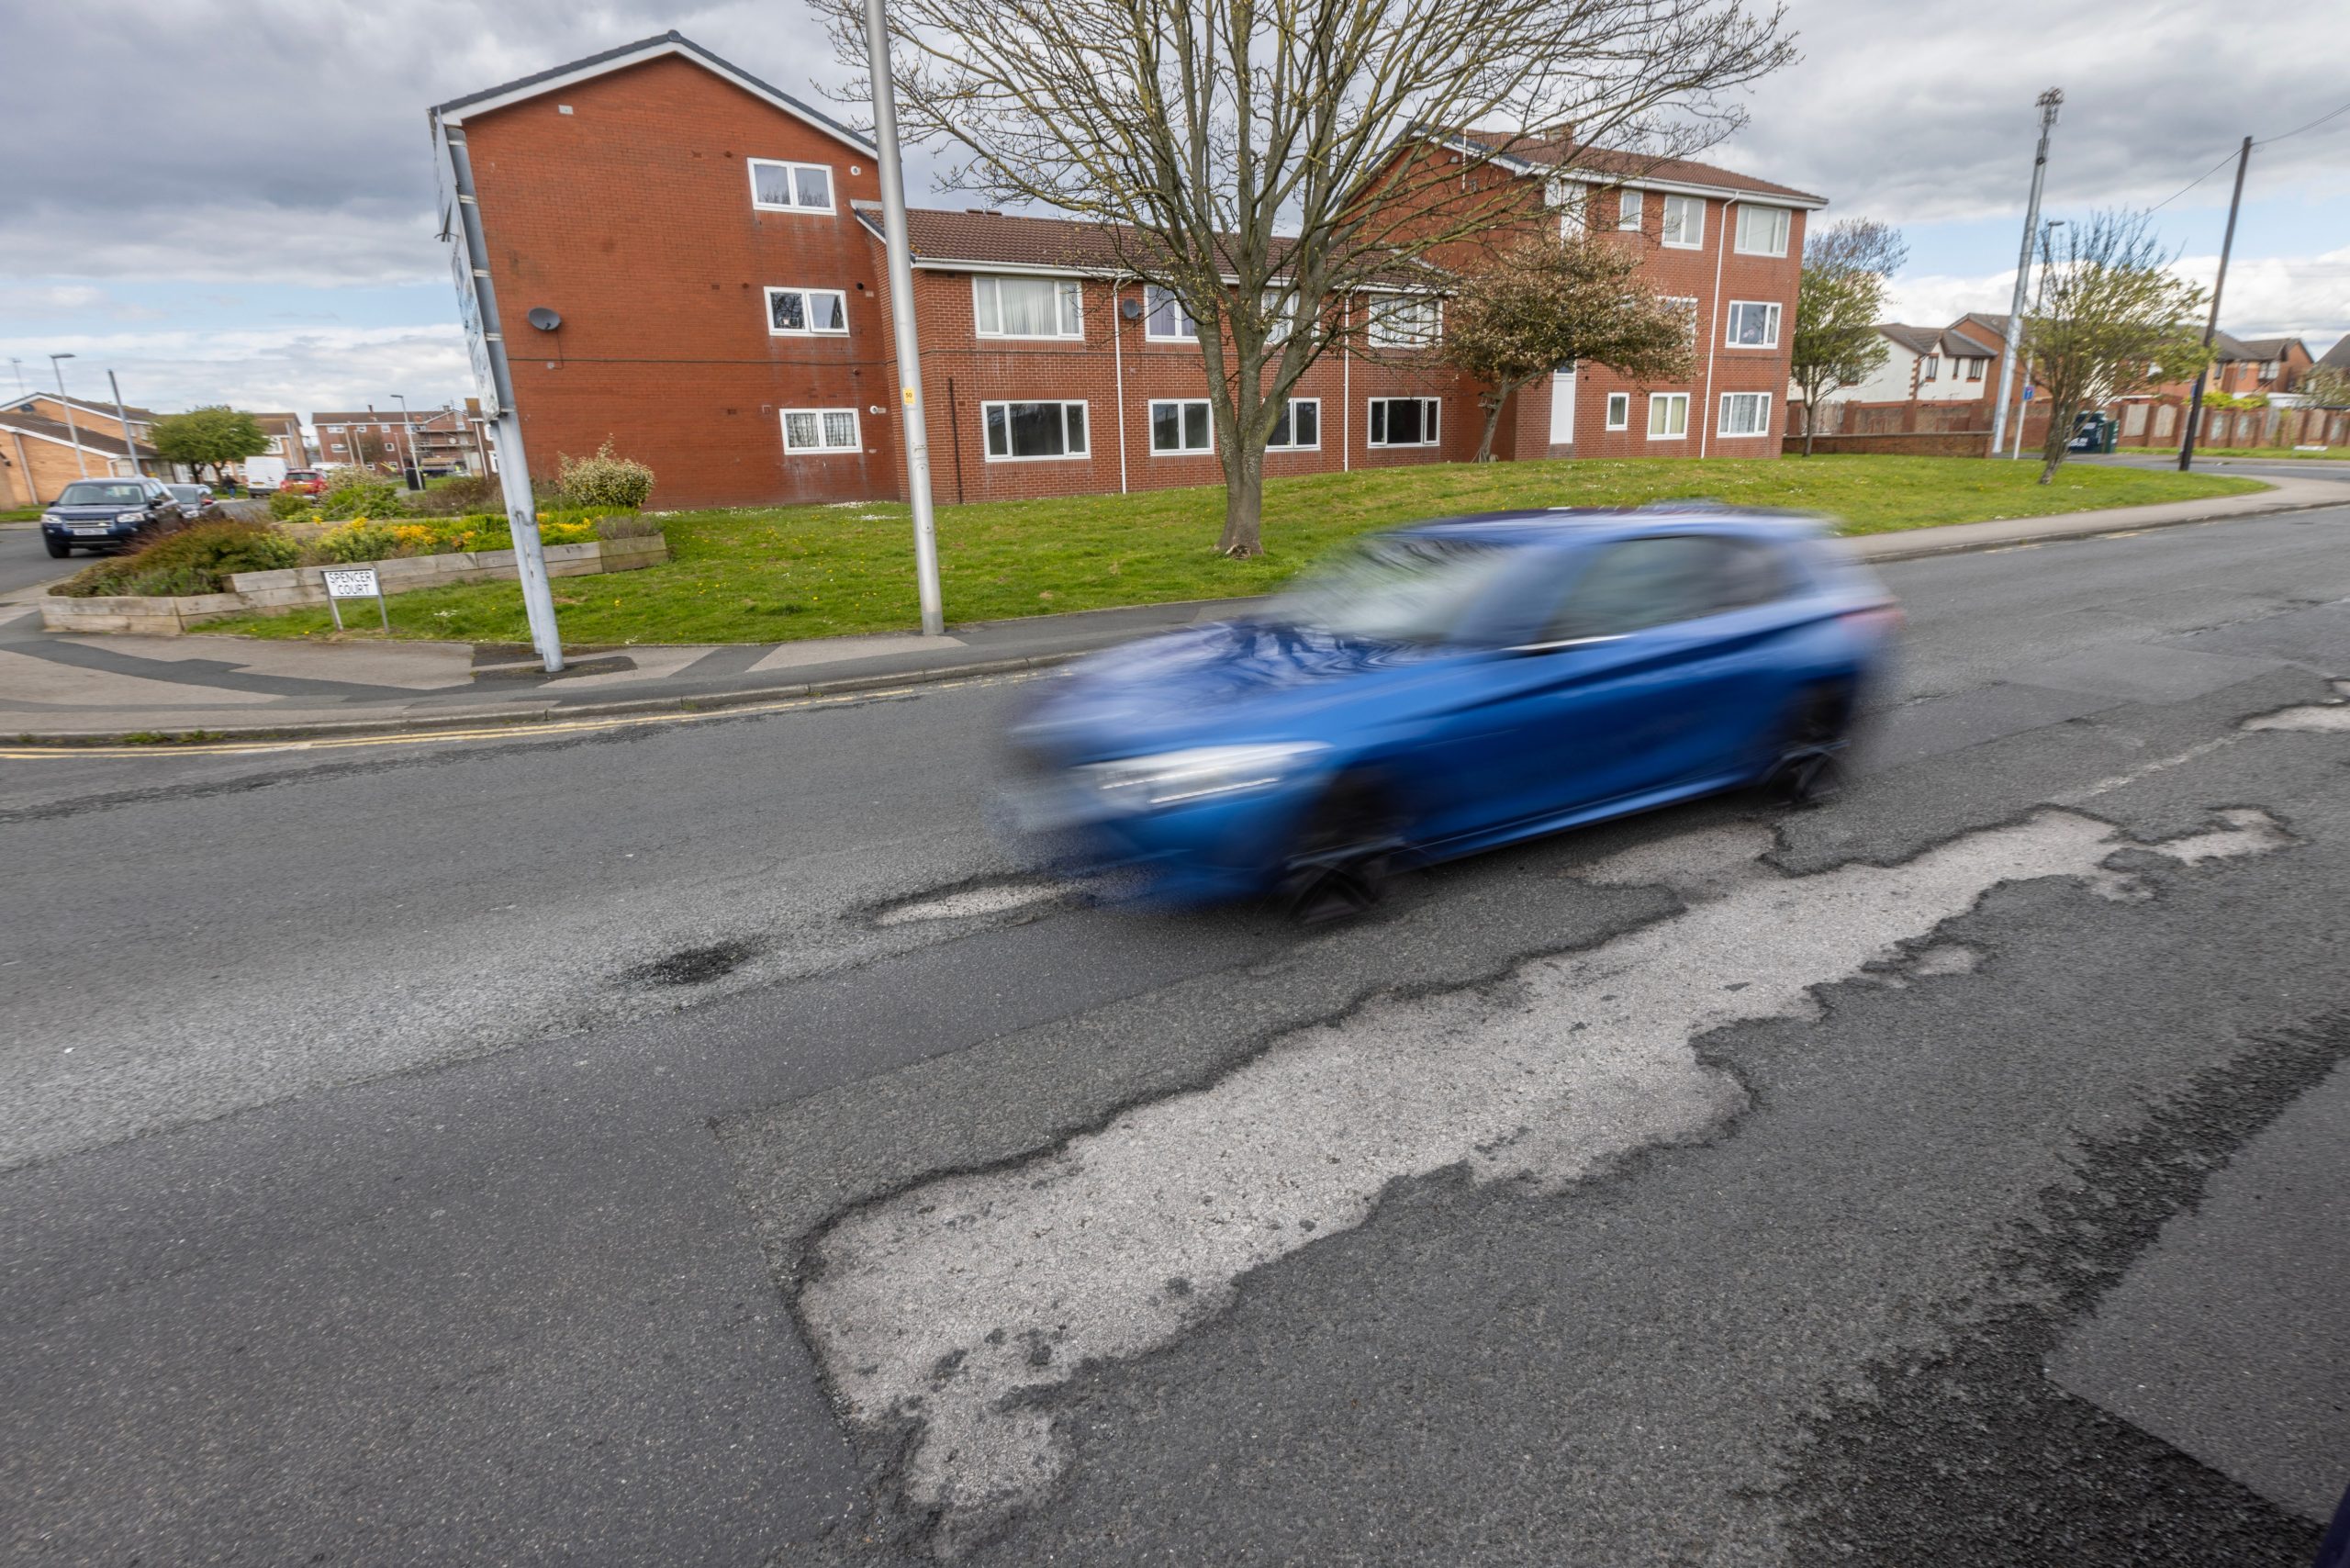 Talbot Road, Blackpool, is still a bumpy ride — but is due to be repaired